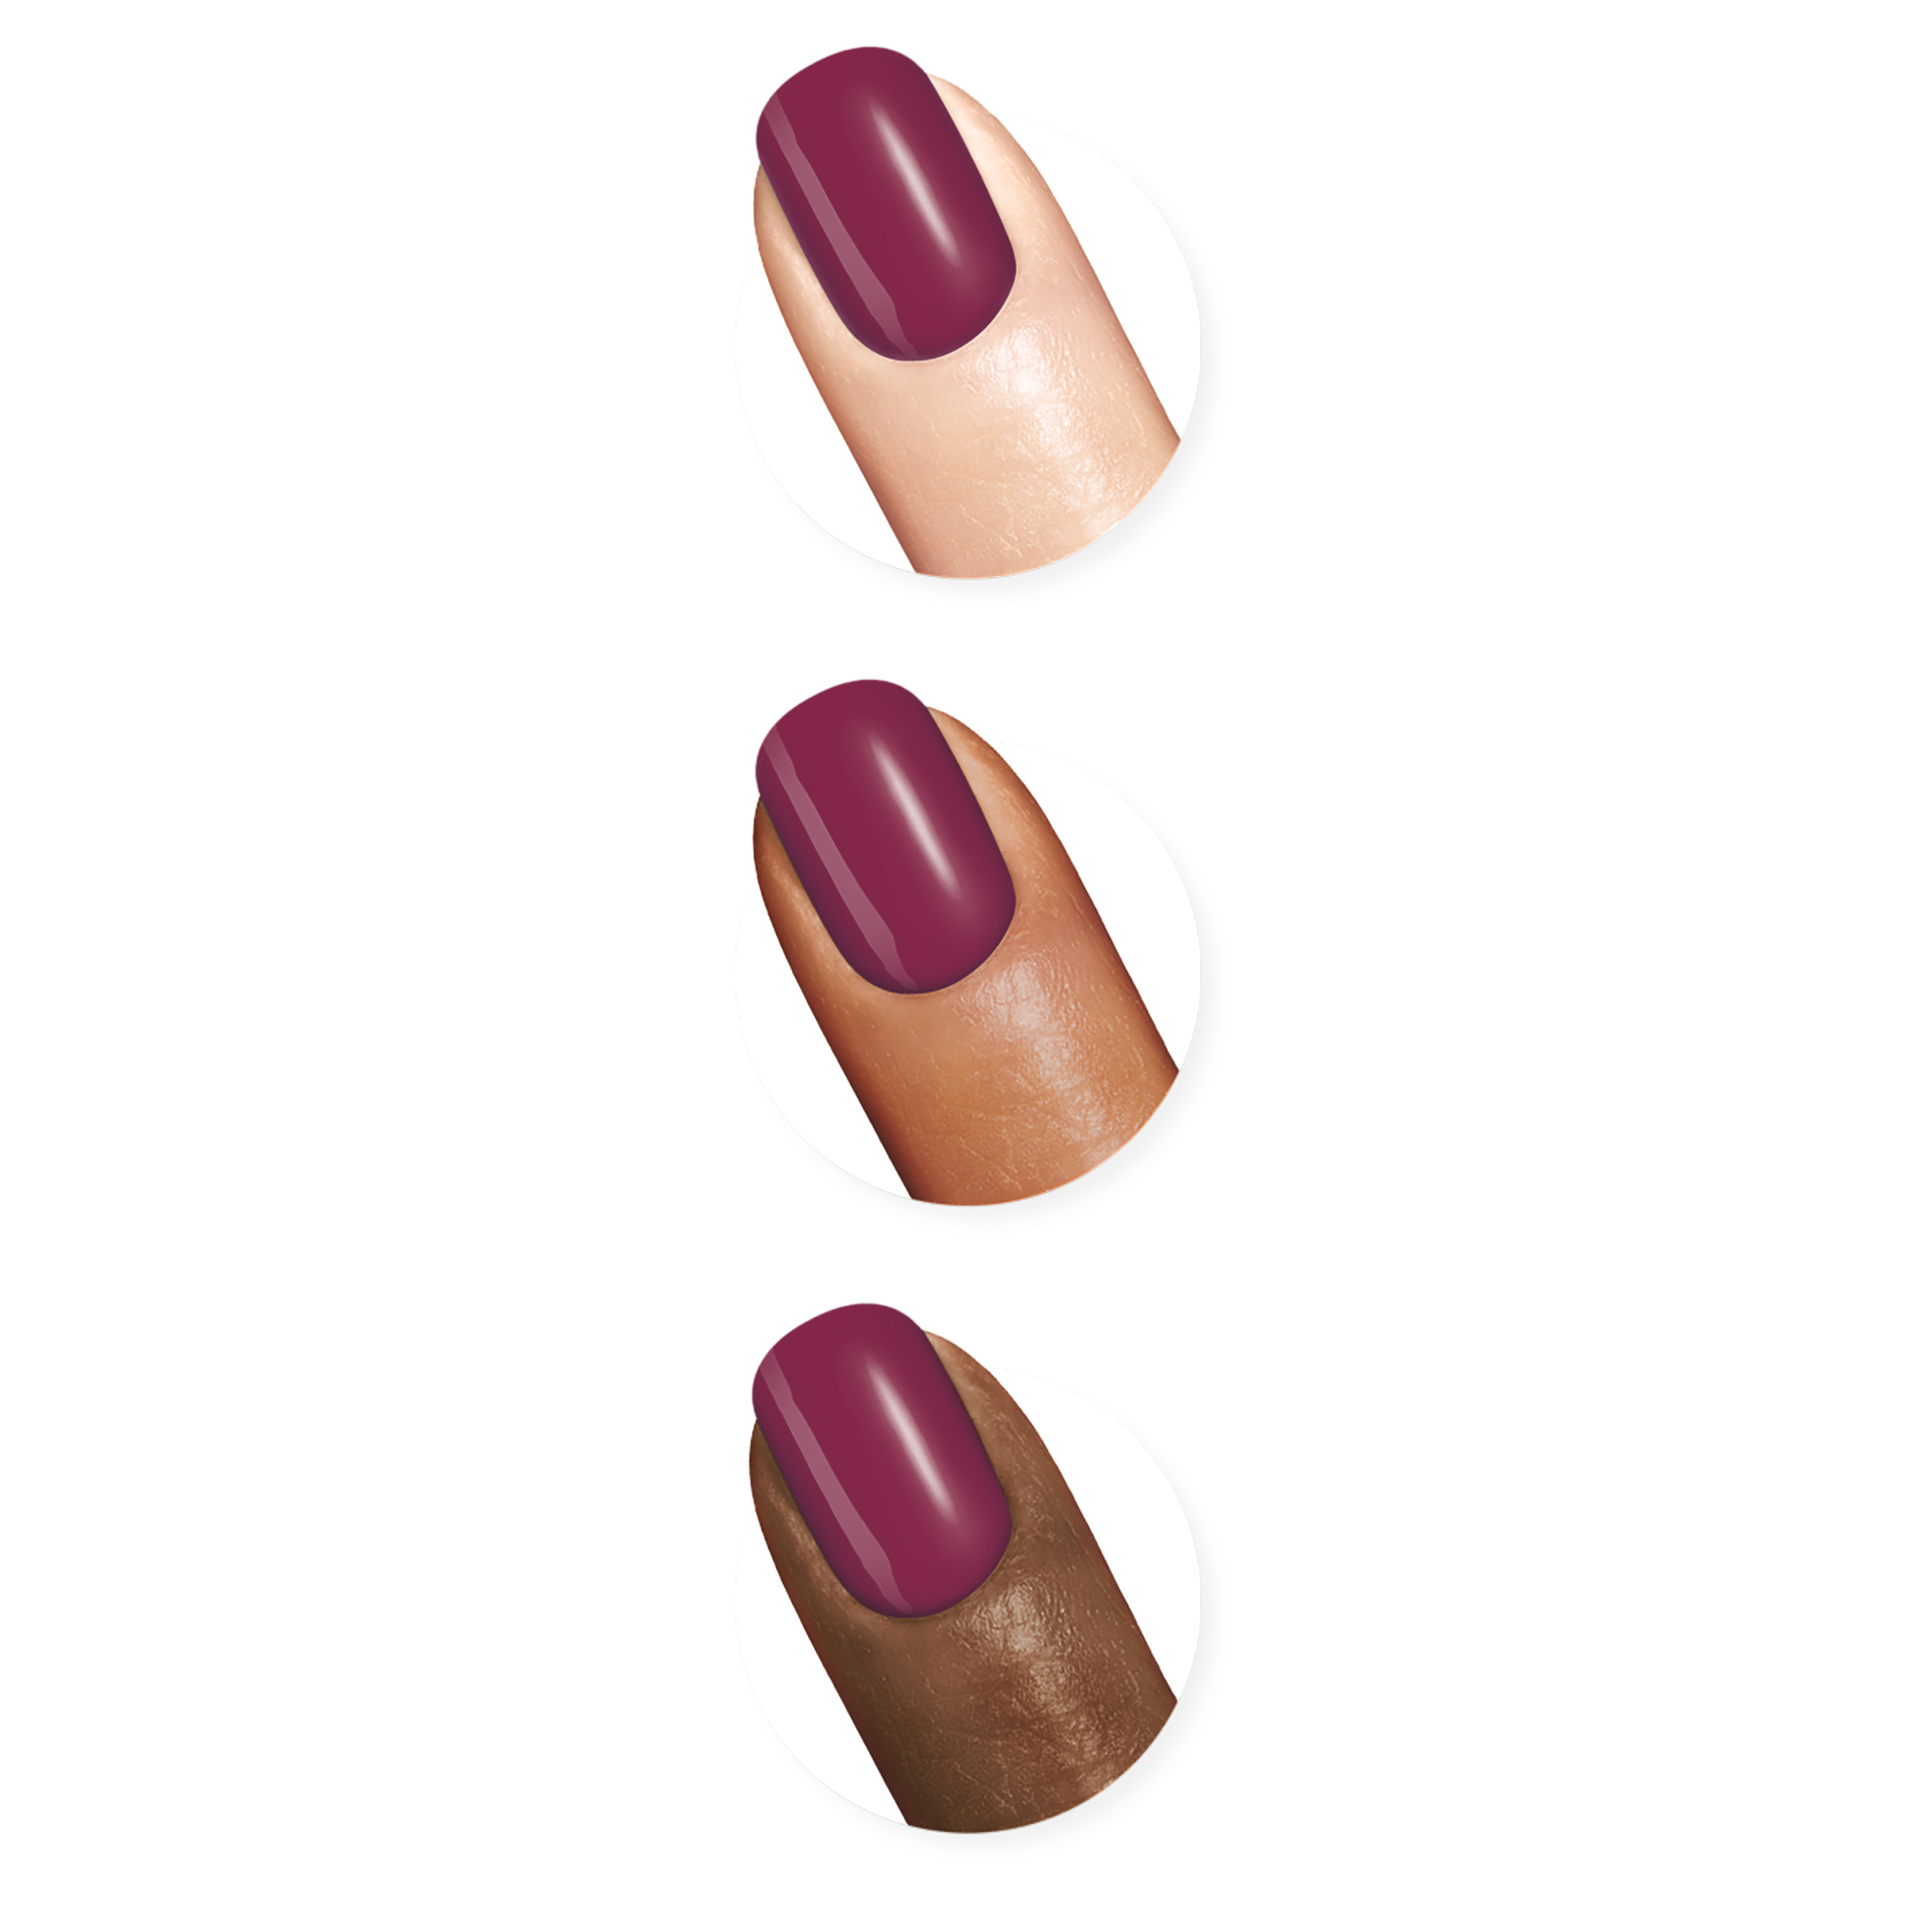 Sally Hansen Xtreme Wear Nail Polish, Drop The Beet, 0.4 fl oz, Chip Resistant, Bold Color - image 7 of 14